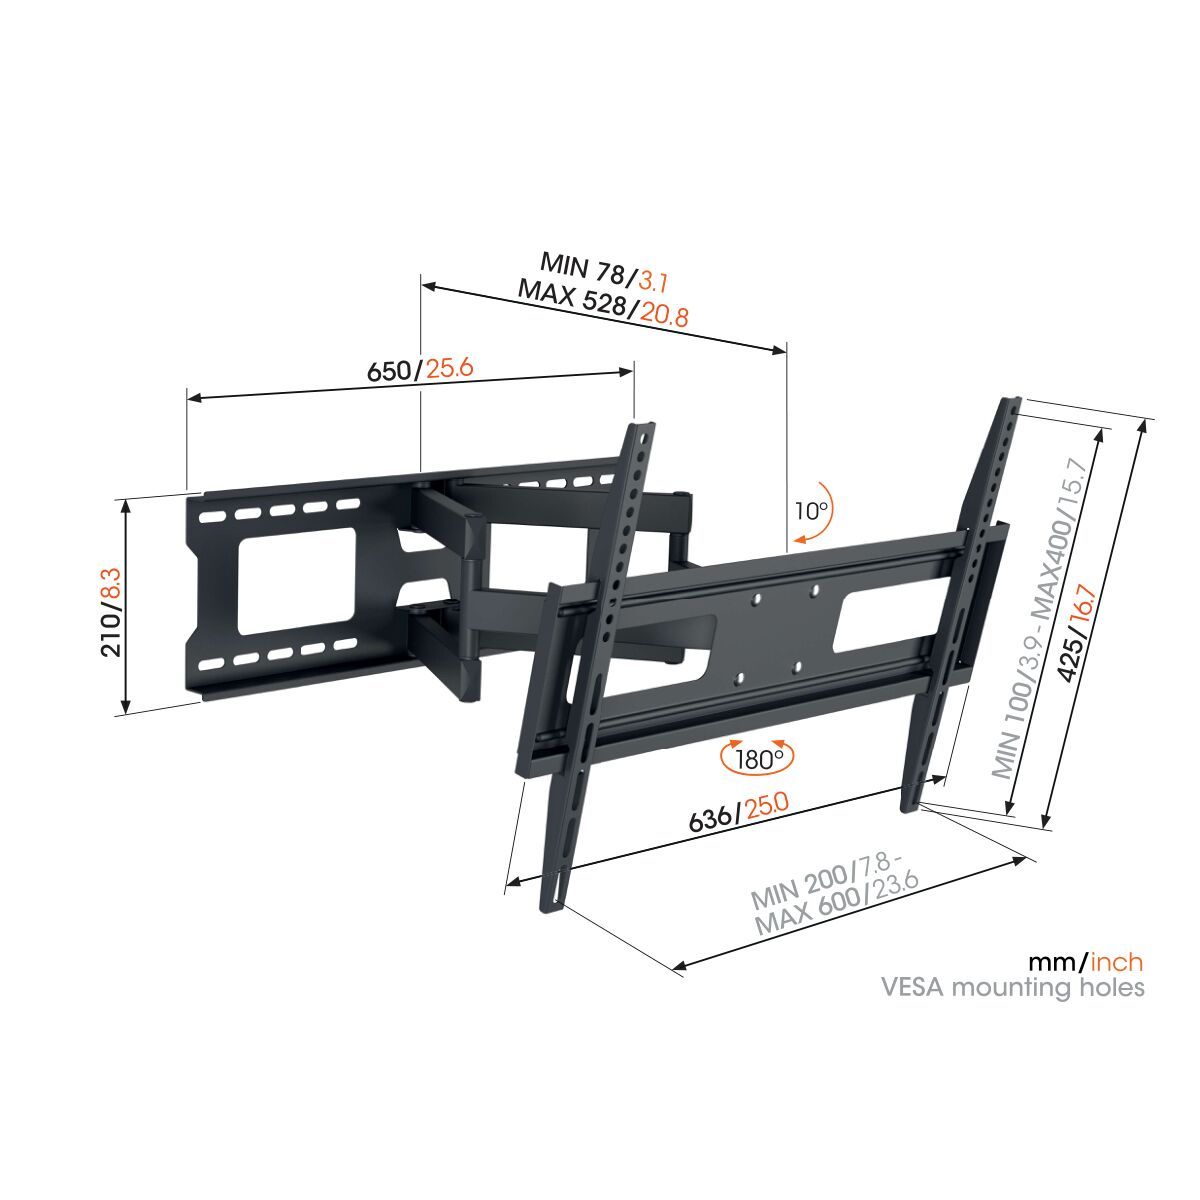 Vogel's MA4040 Full-Motion TV Wall Mount - Suitable for 40 up to 77 inch TVs - Full motion (up to 180°) - Tilt up to 10° - Dimensions